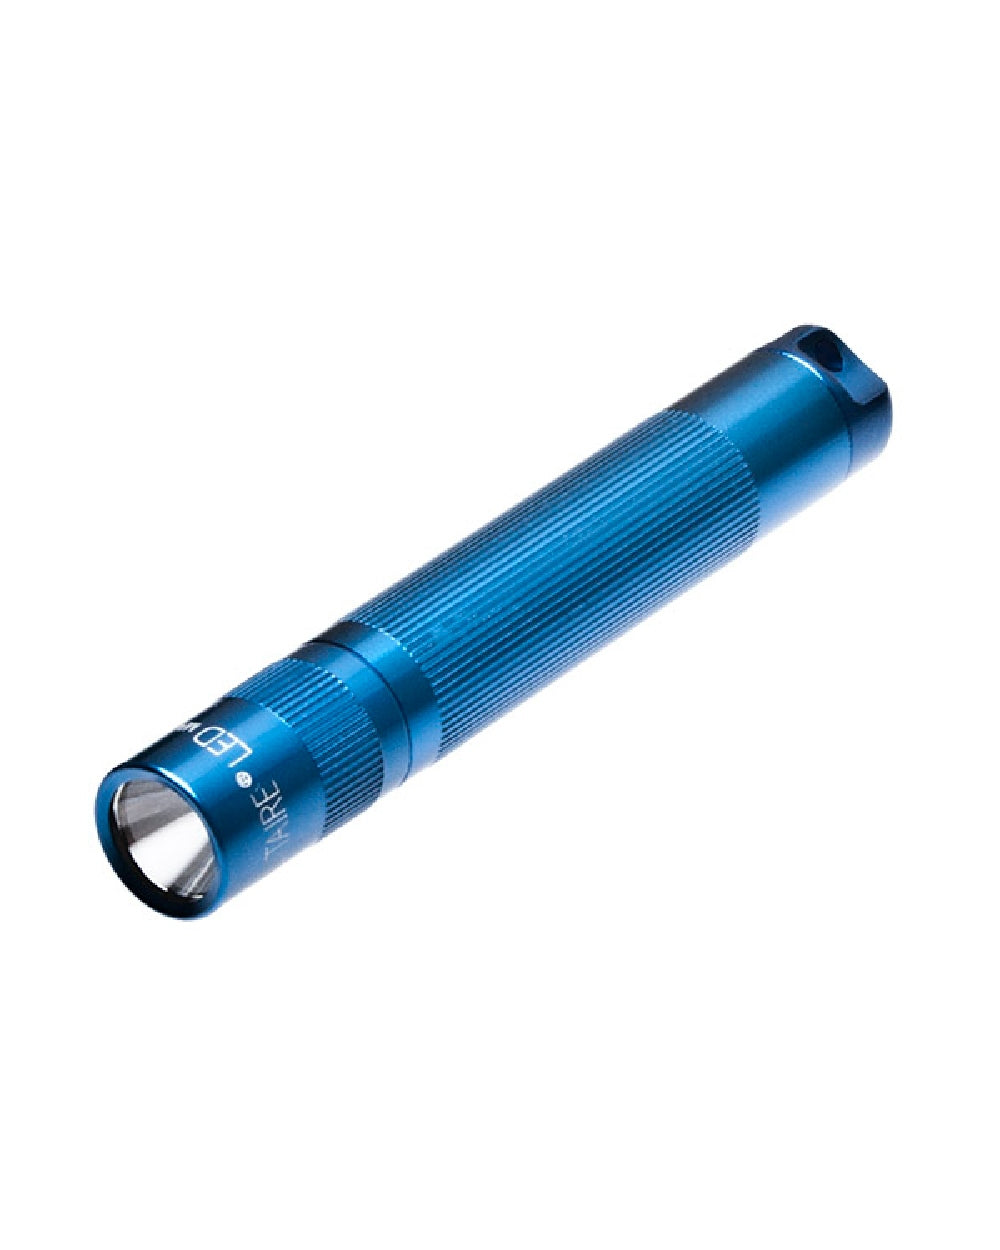 Maglite Solitaire 1-Cell AAA LED Torch in Blue 